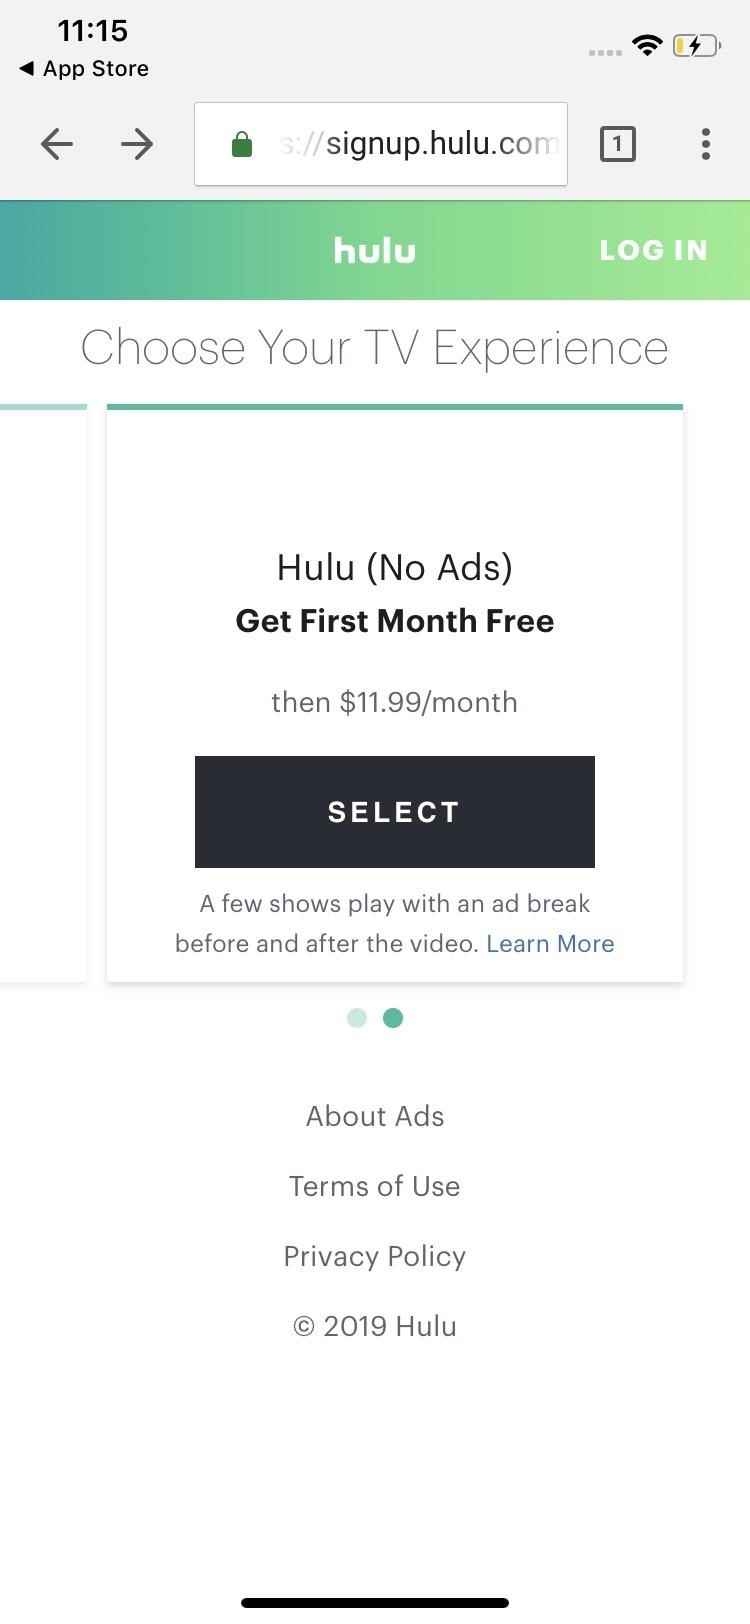 Save Money on Hulu by Picking the Plan That's Right for You